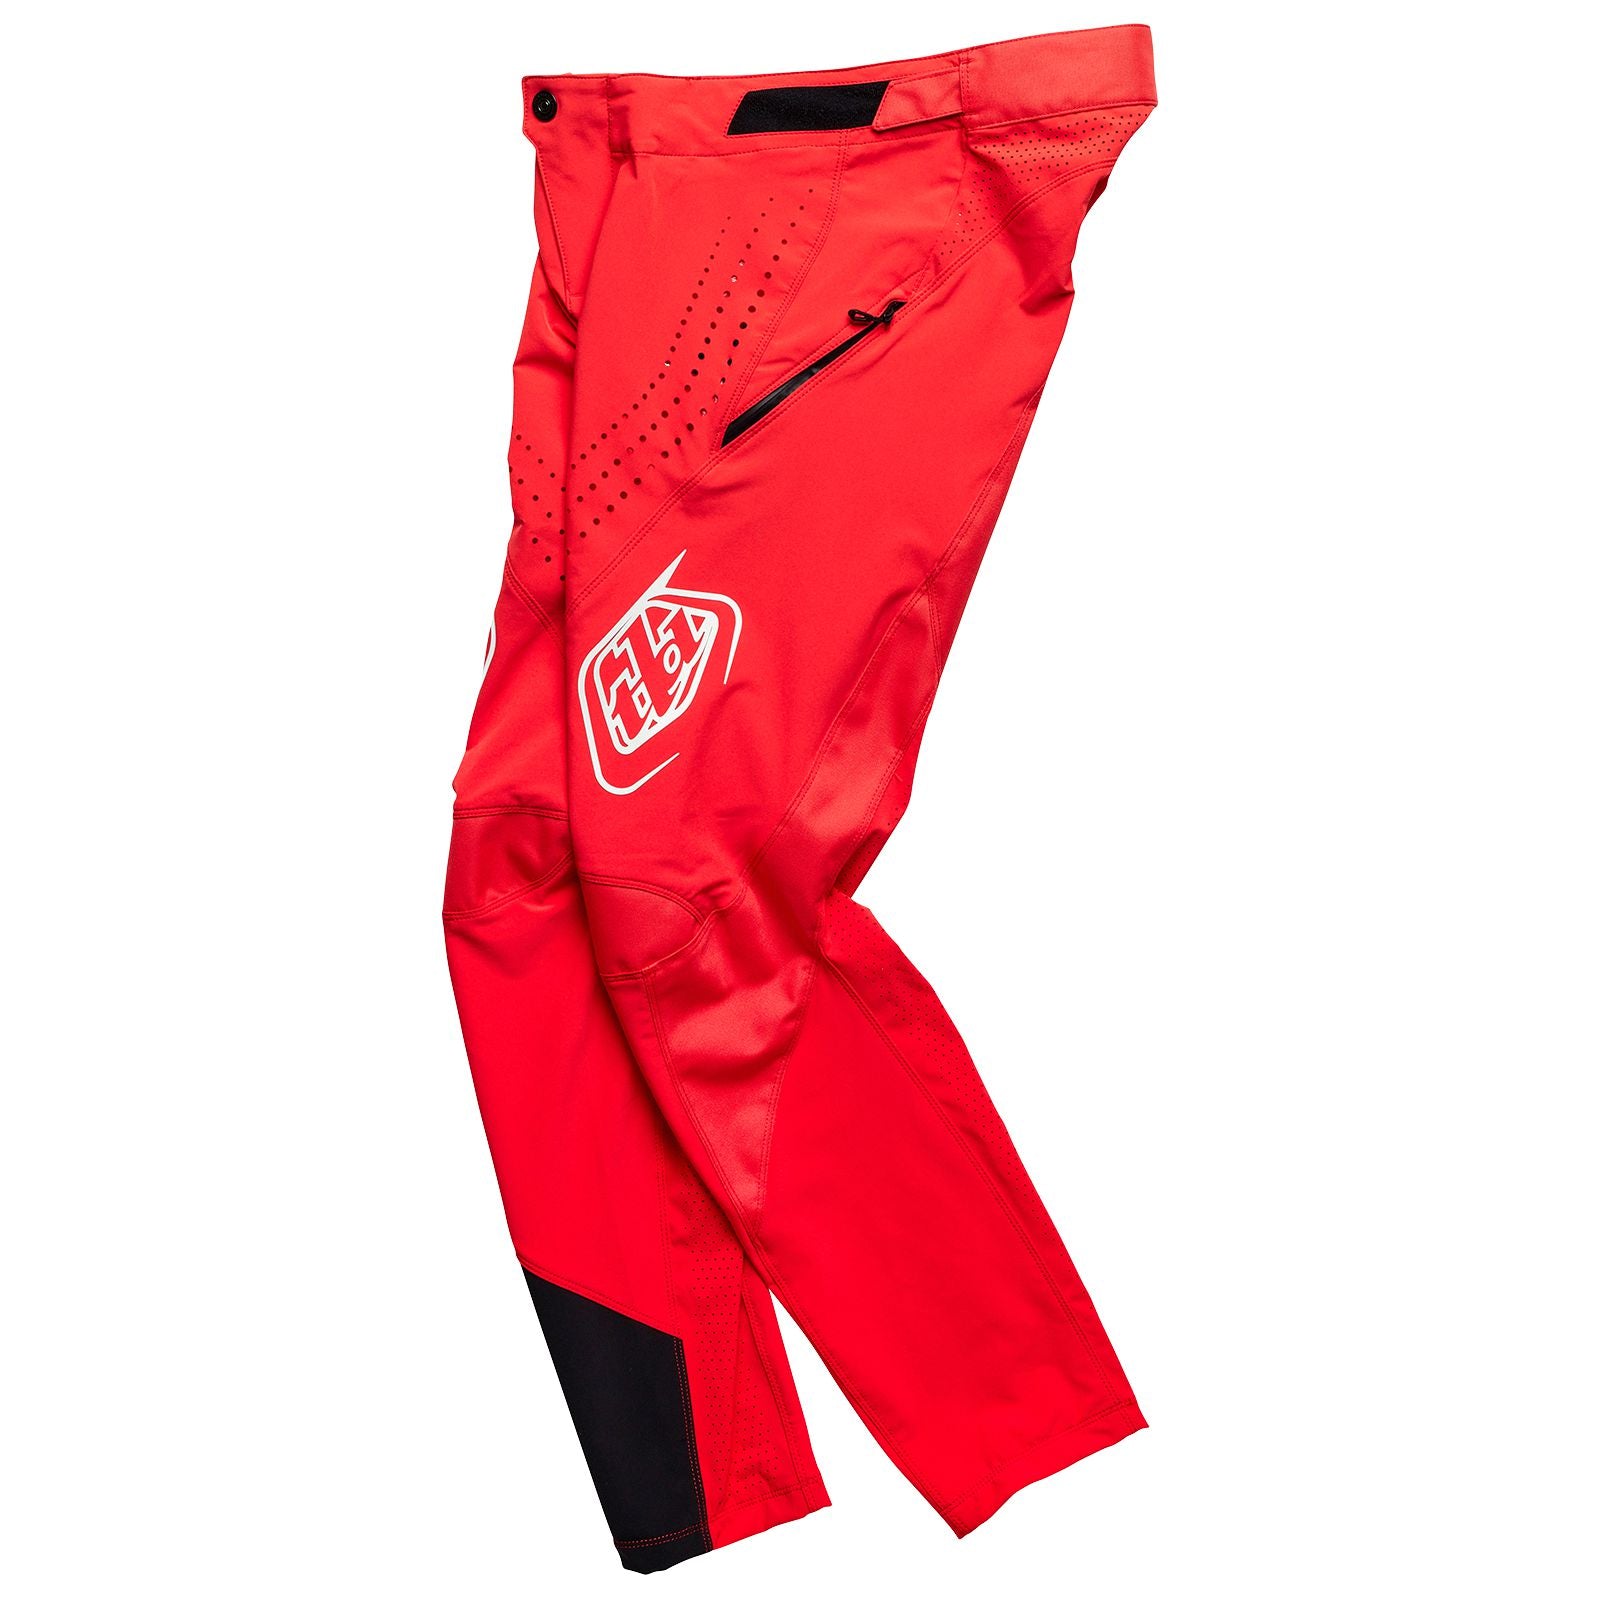 A TLD Sprint Pant Mono Race Red with black accents.